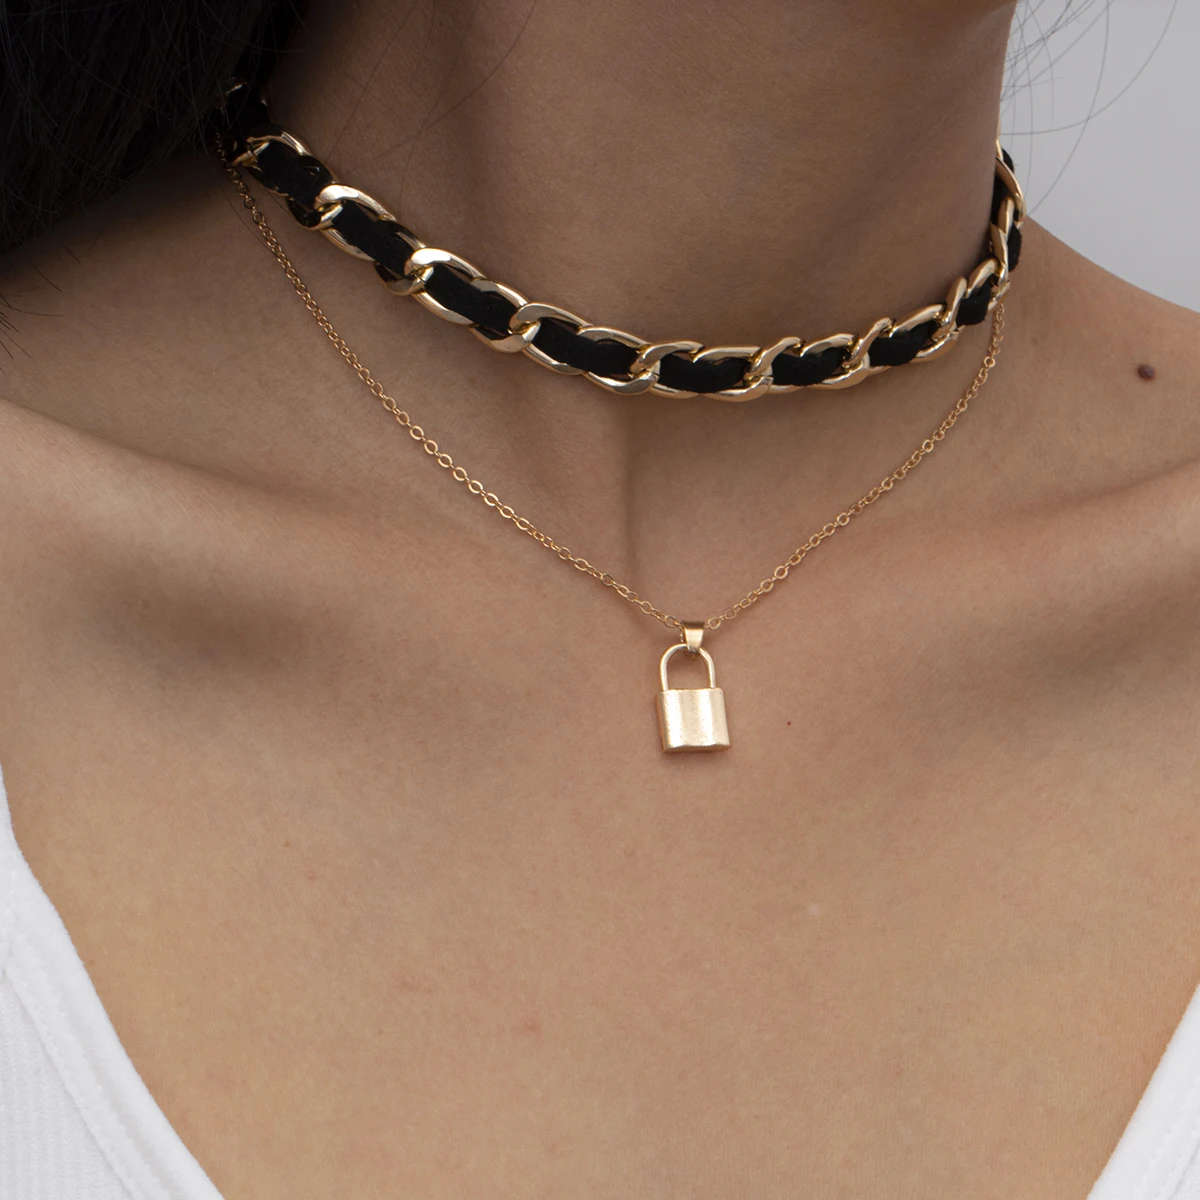 

SHIXIN Fashion Layer Necklace Black Flocking cloth Cross Choker Necklace Thin Chain Women Lock Pendant Initial Necklace Jewelry, Silver,gold